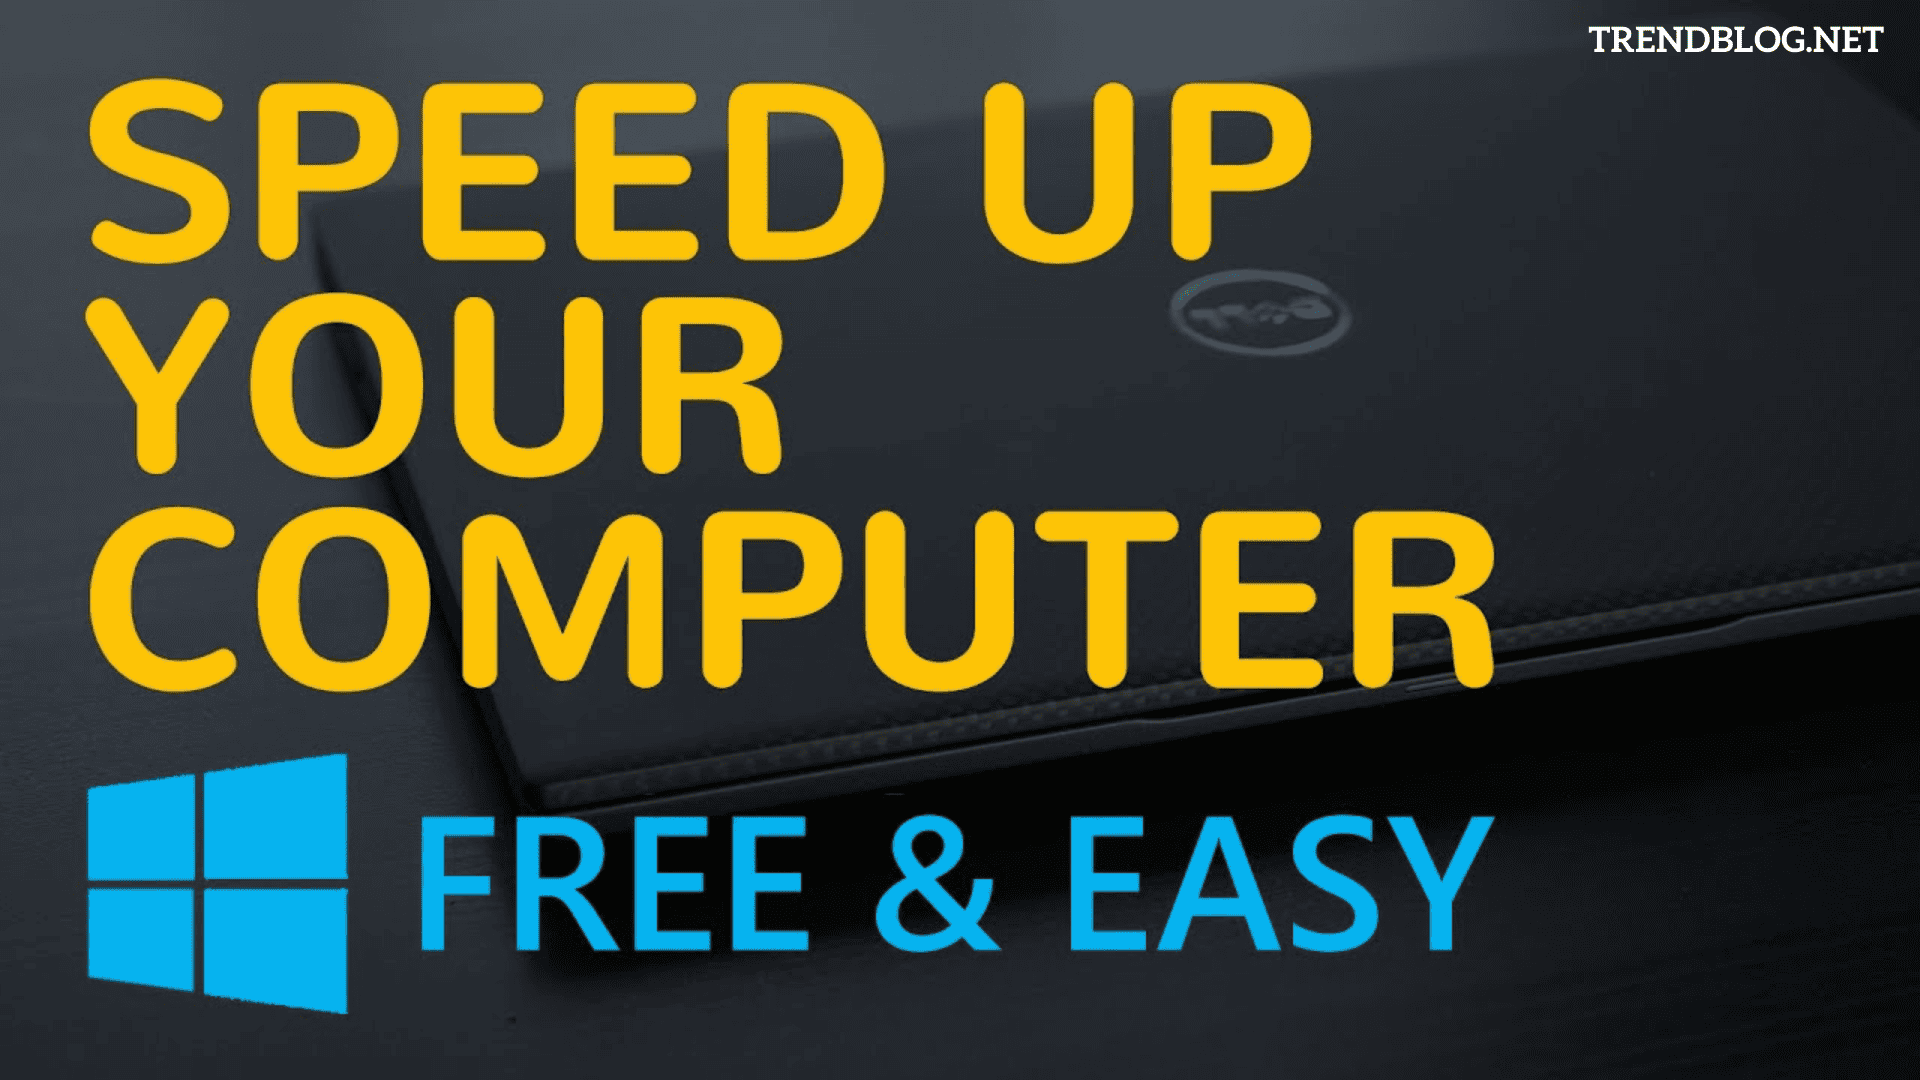  How to Speed Up Your Computer using Disk Optimization, RAM, Drivers